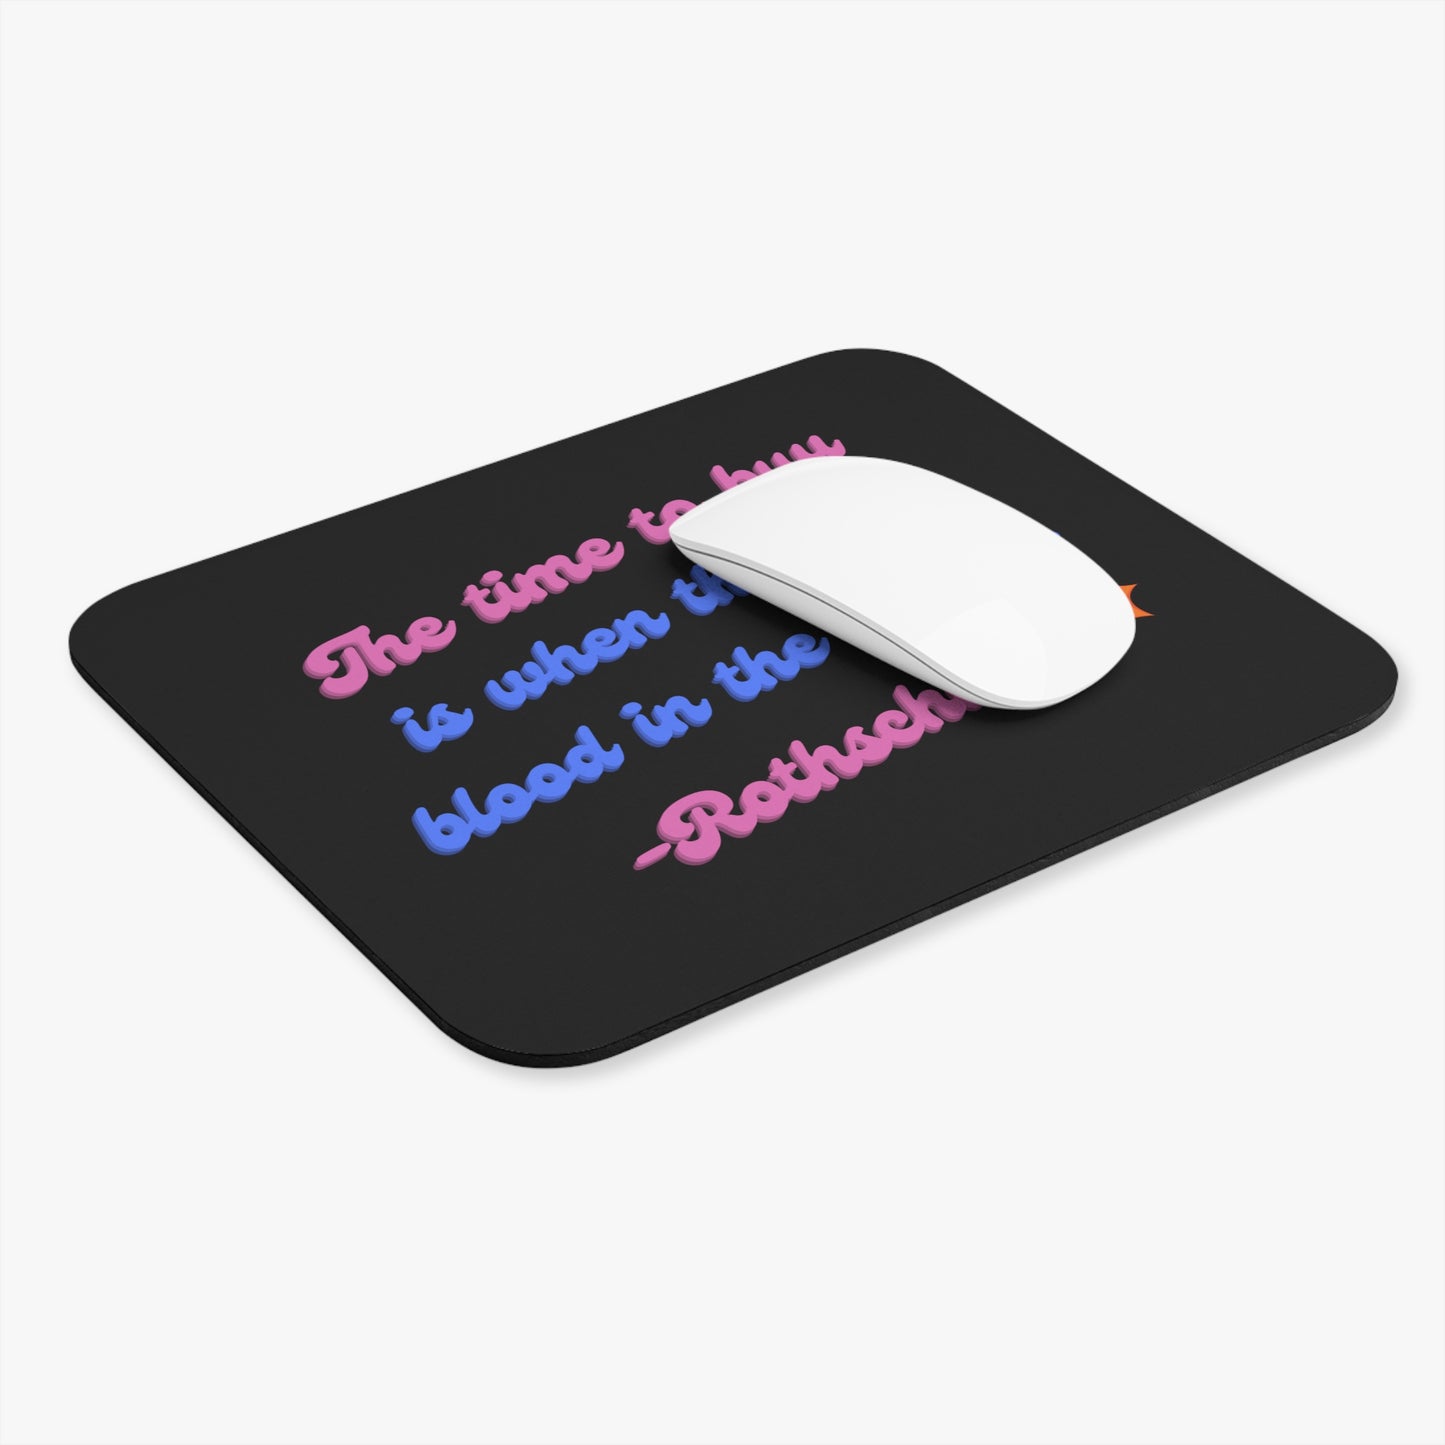 The Rothschild Rule Mouse Pad